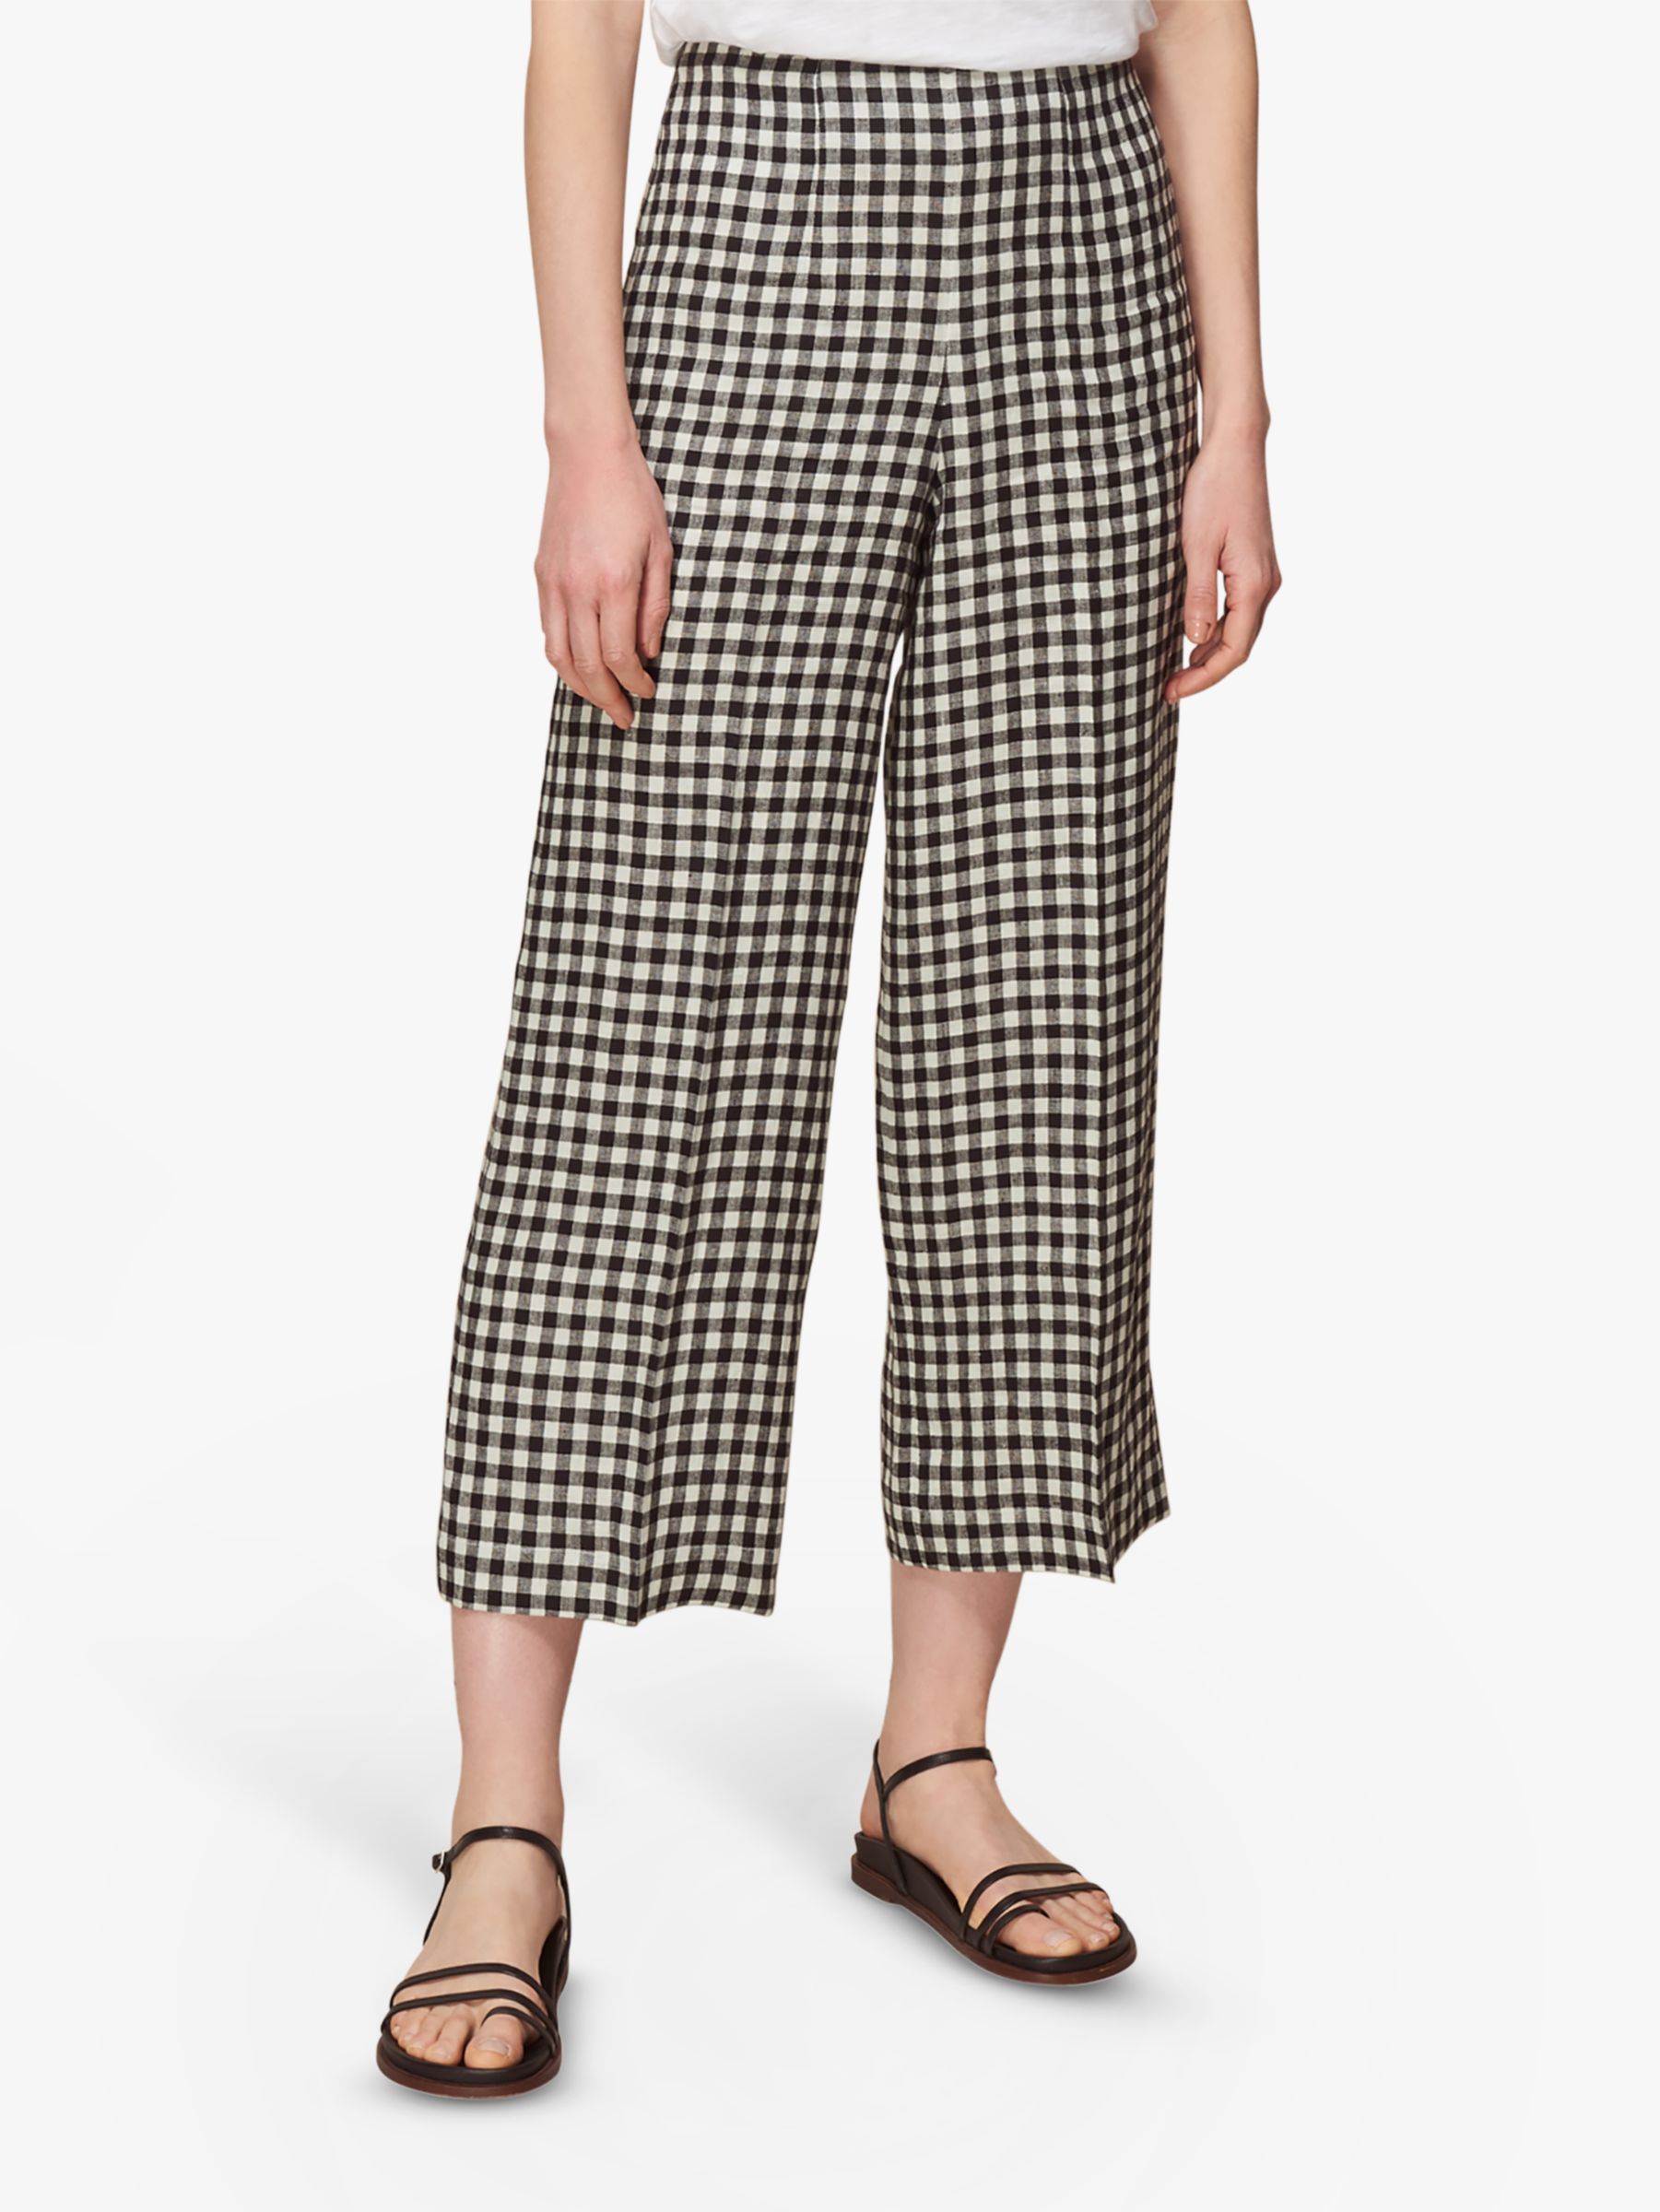 Whistles Gingham Print Cropped Linen Trousers, Black/White